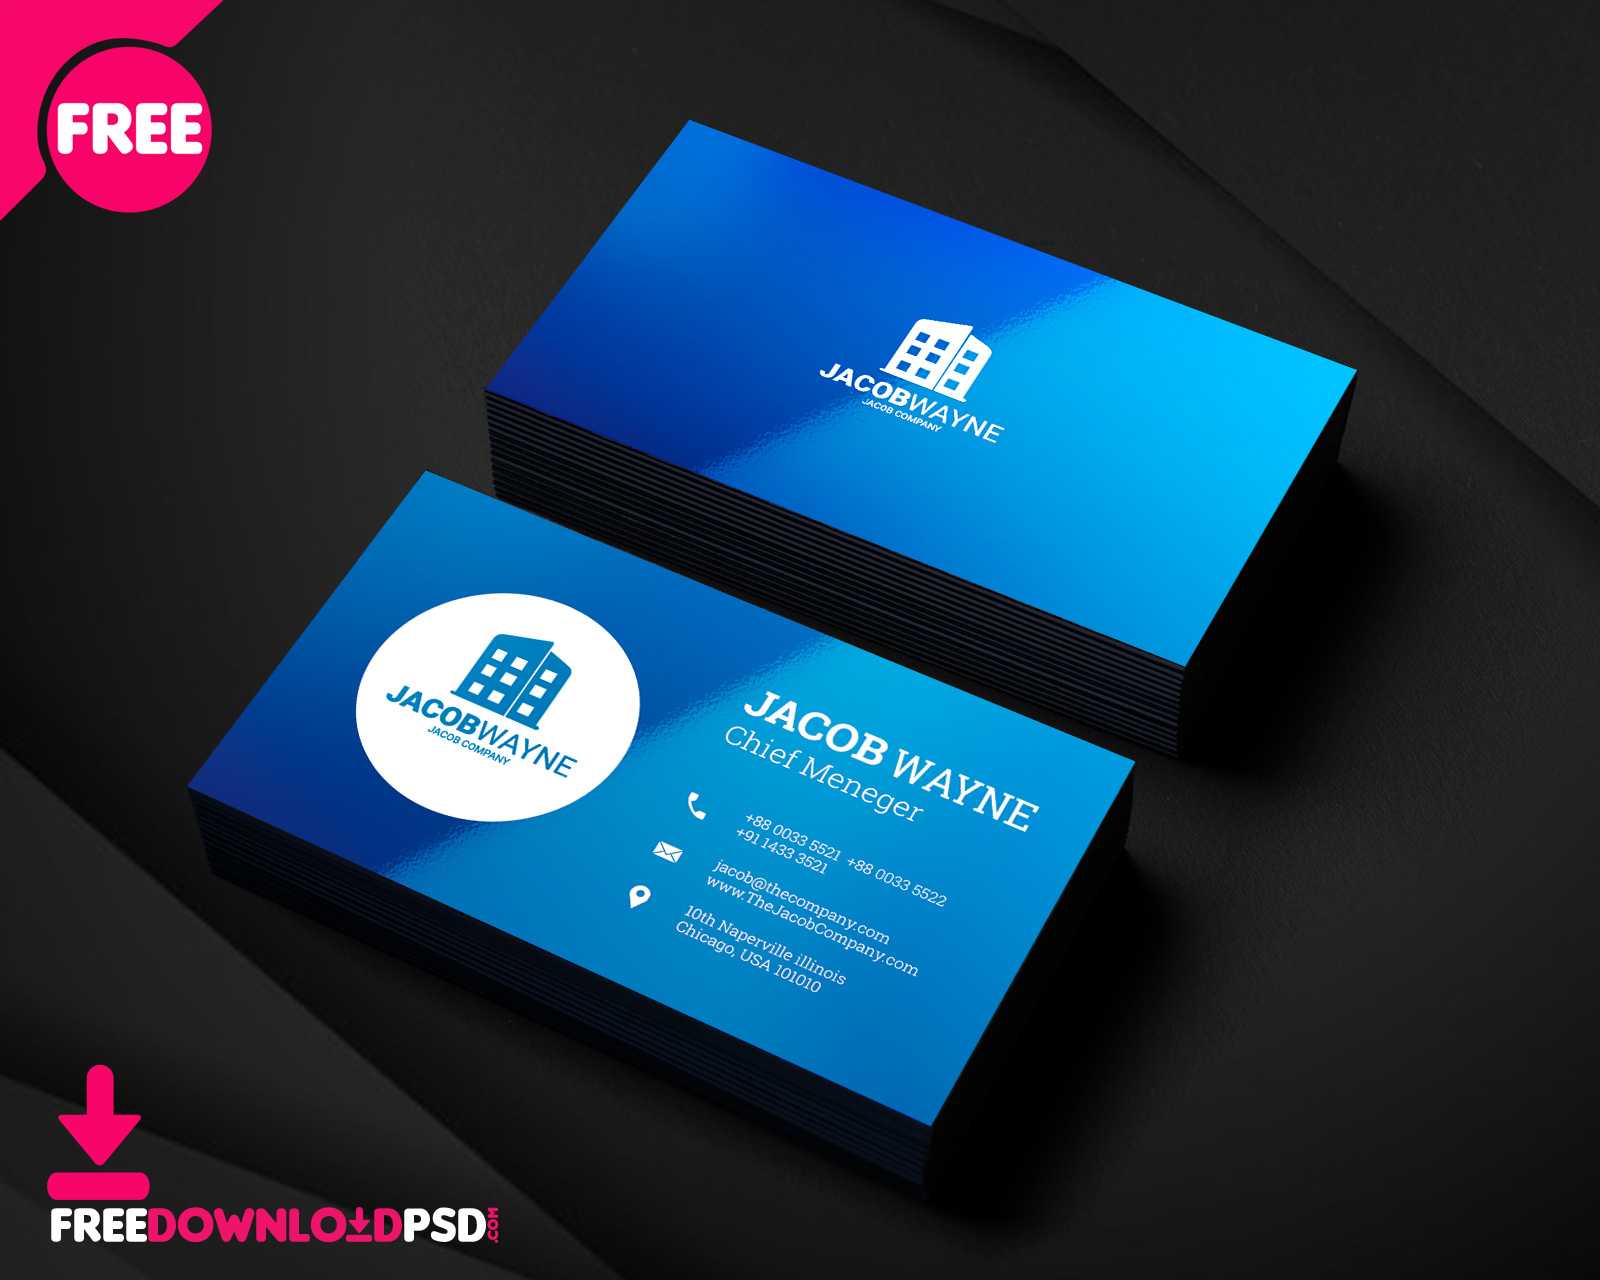 Real Estate Business Card Psd | Freedownloadpsd Intended For Visiting Card Psd Template